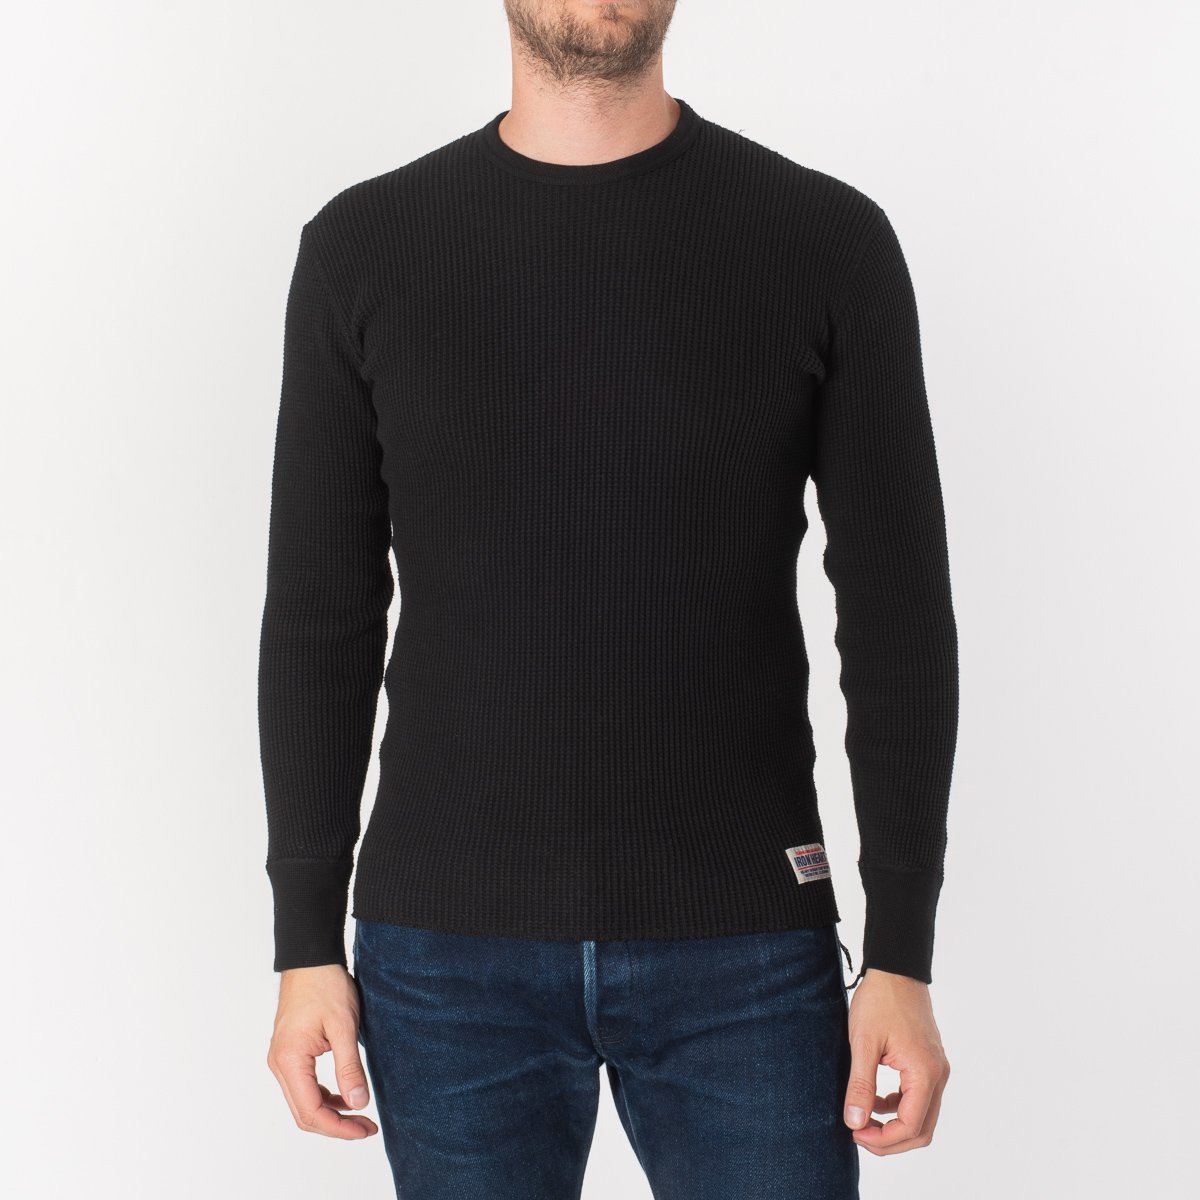 IHTL-1301-BLK Waffle Knit Long Sleeve Crew Neck Thermal Black